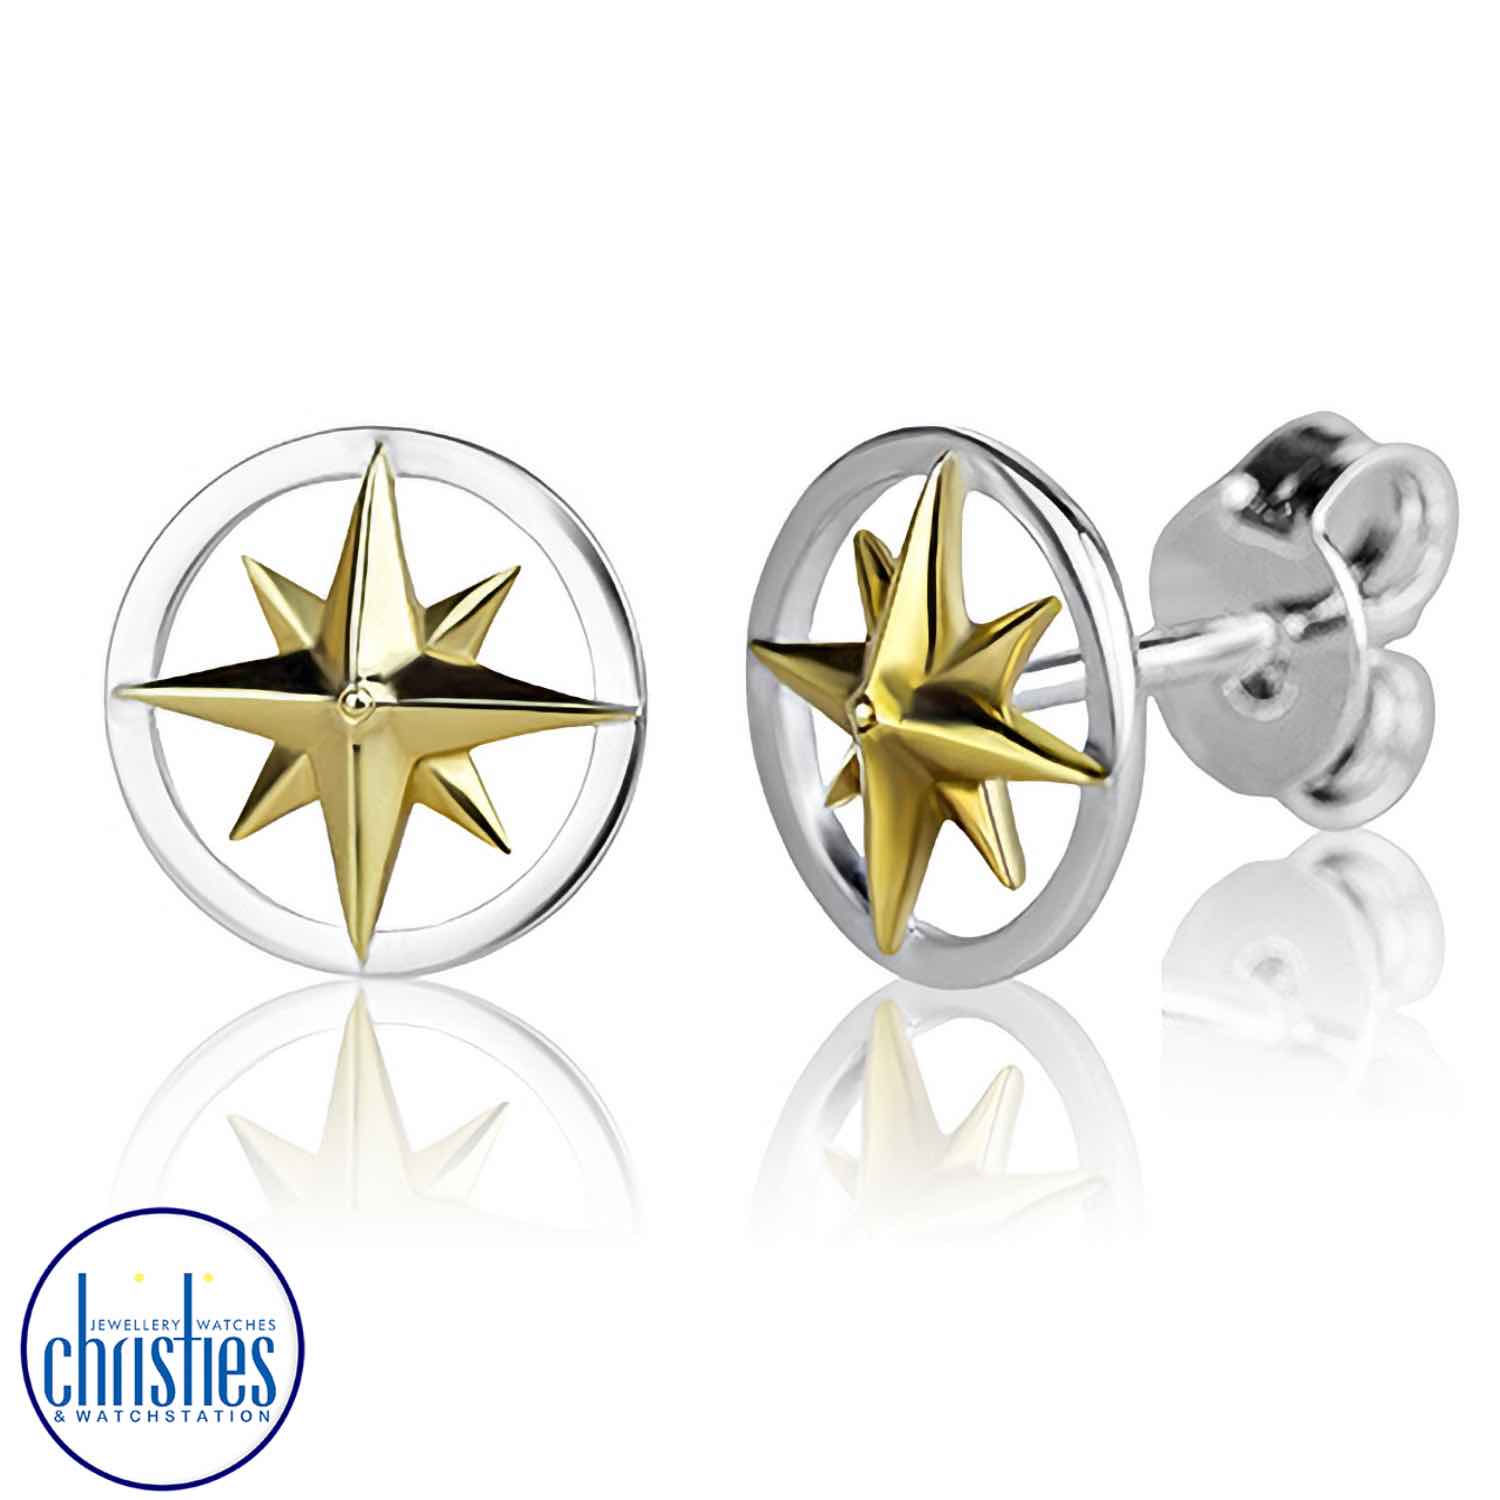 Evolve Jewellery Silver and Gold  Compass Stud Earrings evolve jewellery stockists nz